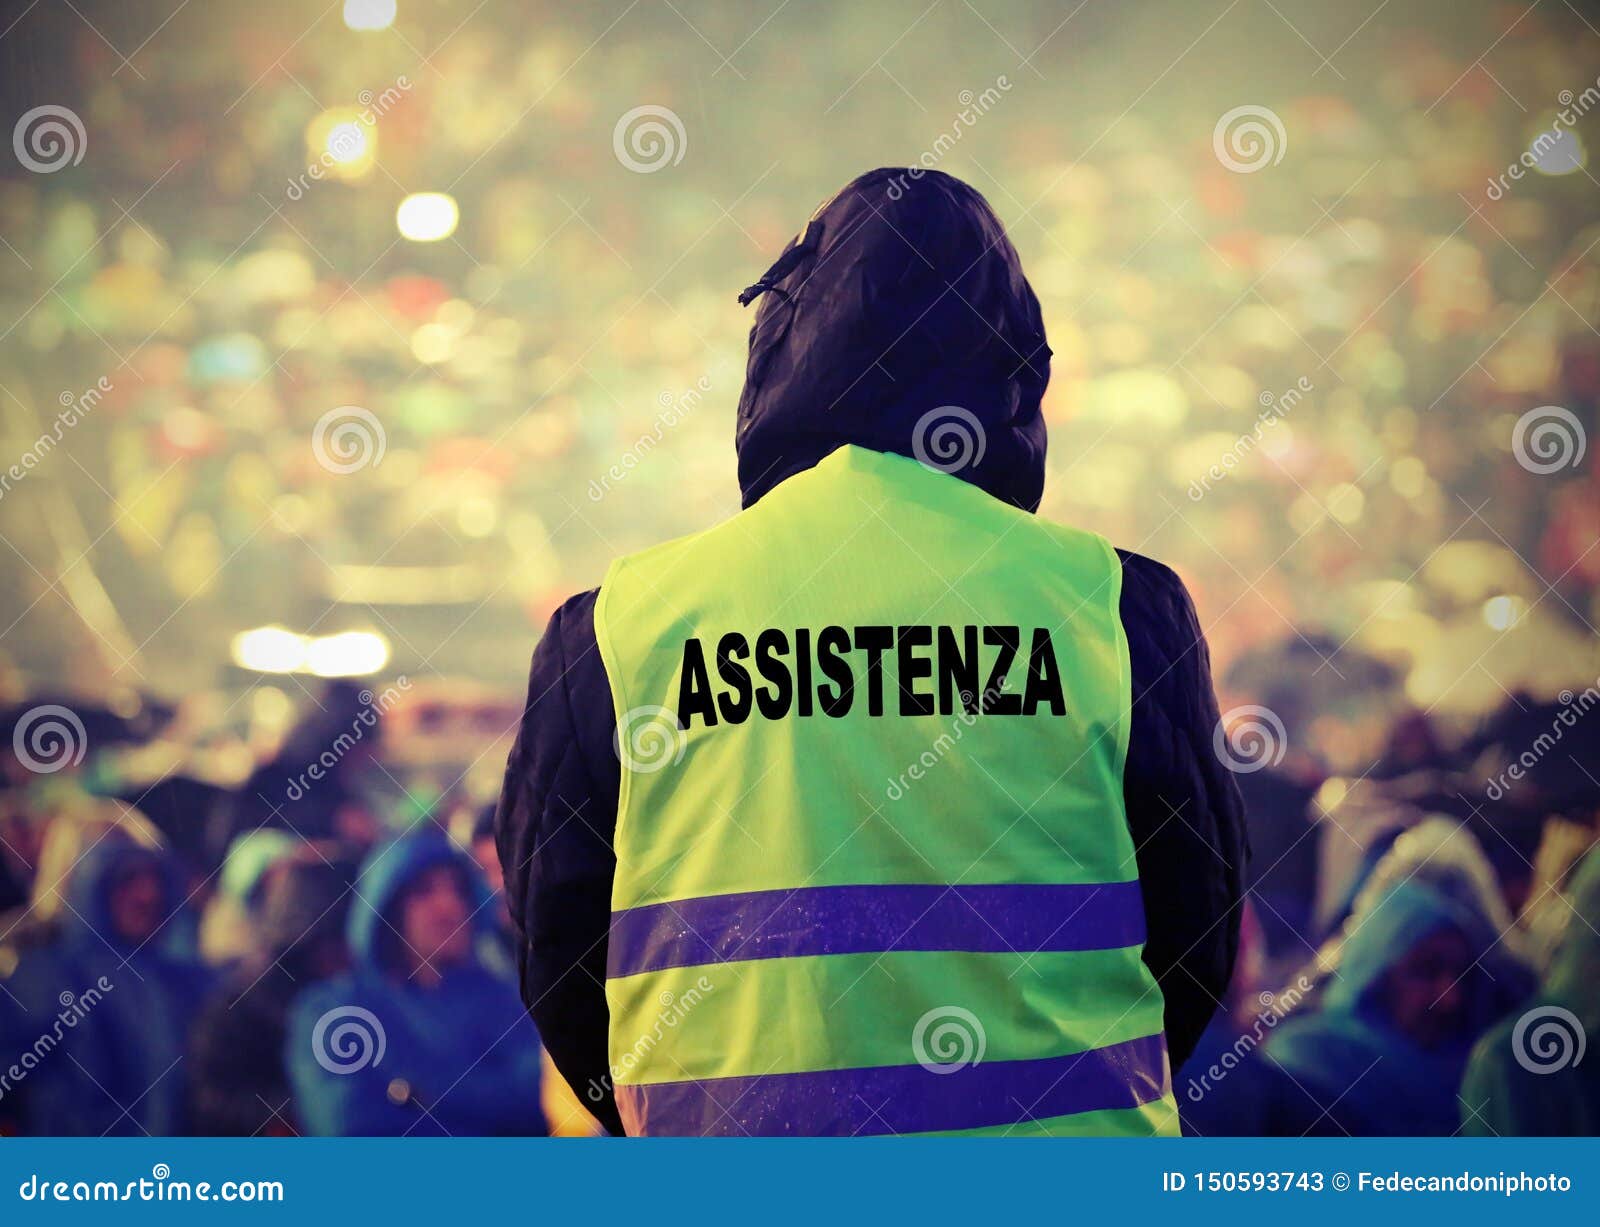 high visibility jacket with text assistance in italy and old ton